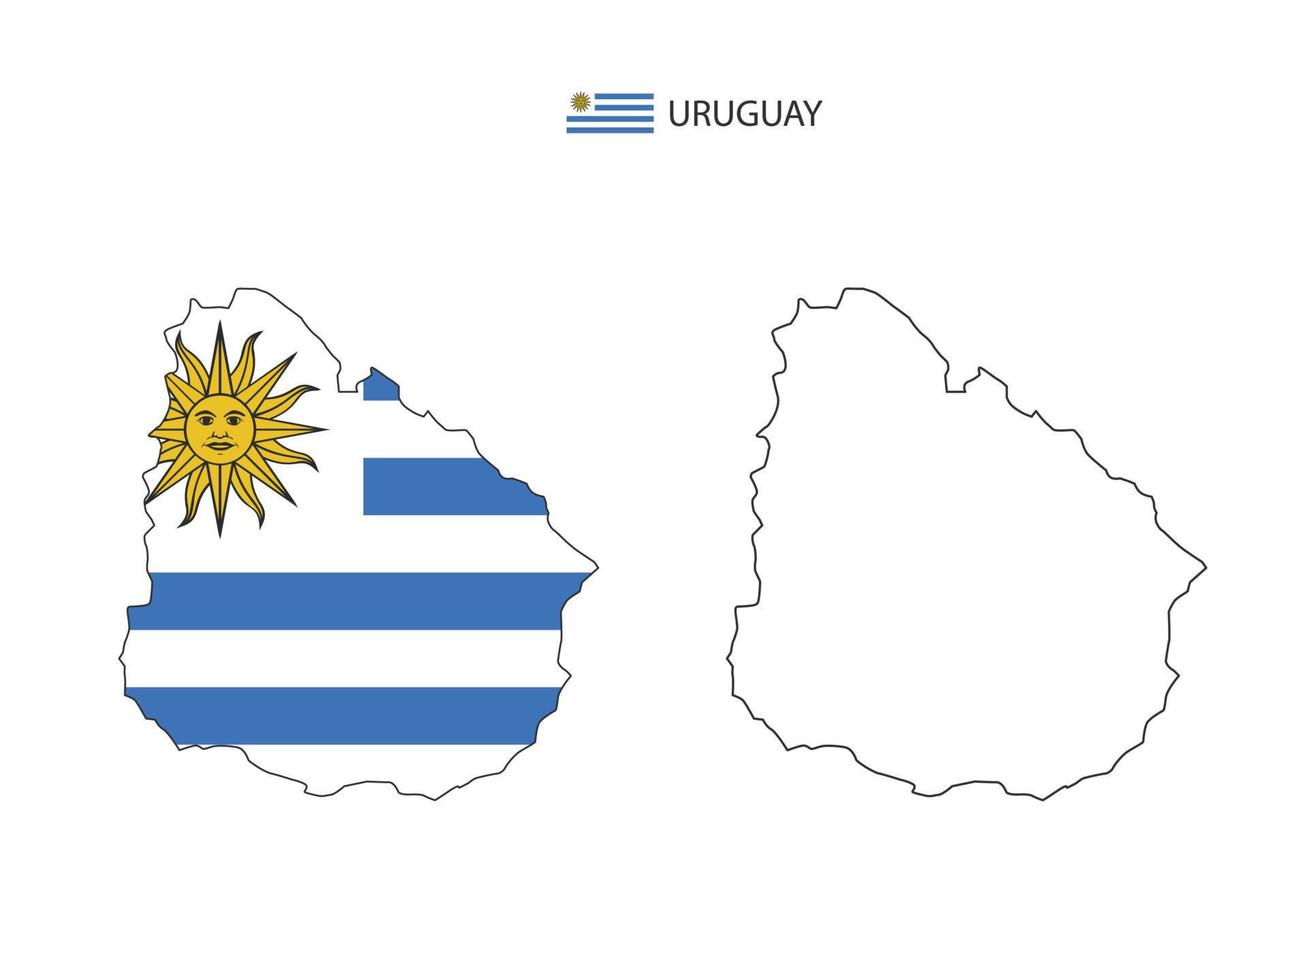 Uruguay map city vector divided by outline simplicity style. Have 2 versions, black thin line version and color of country flag version. Both map were on the white background.